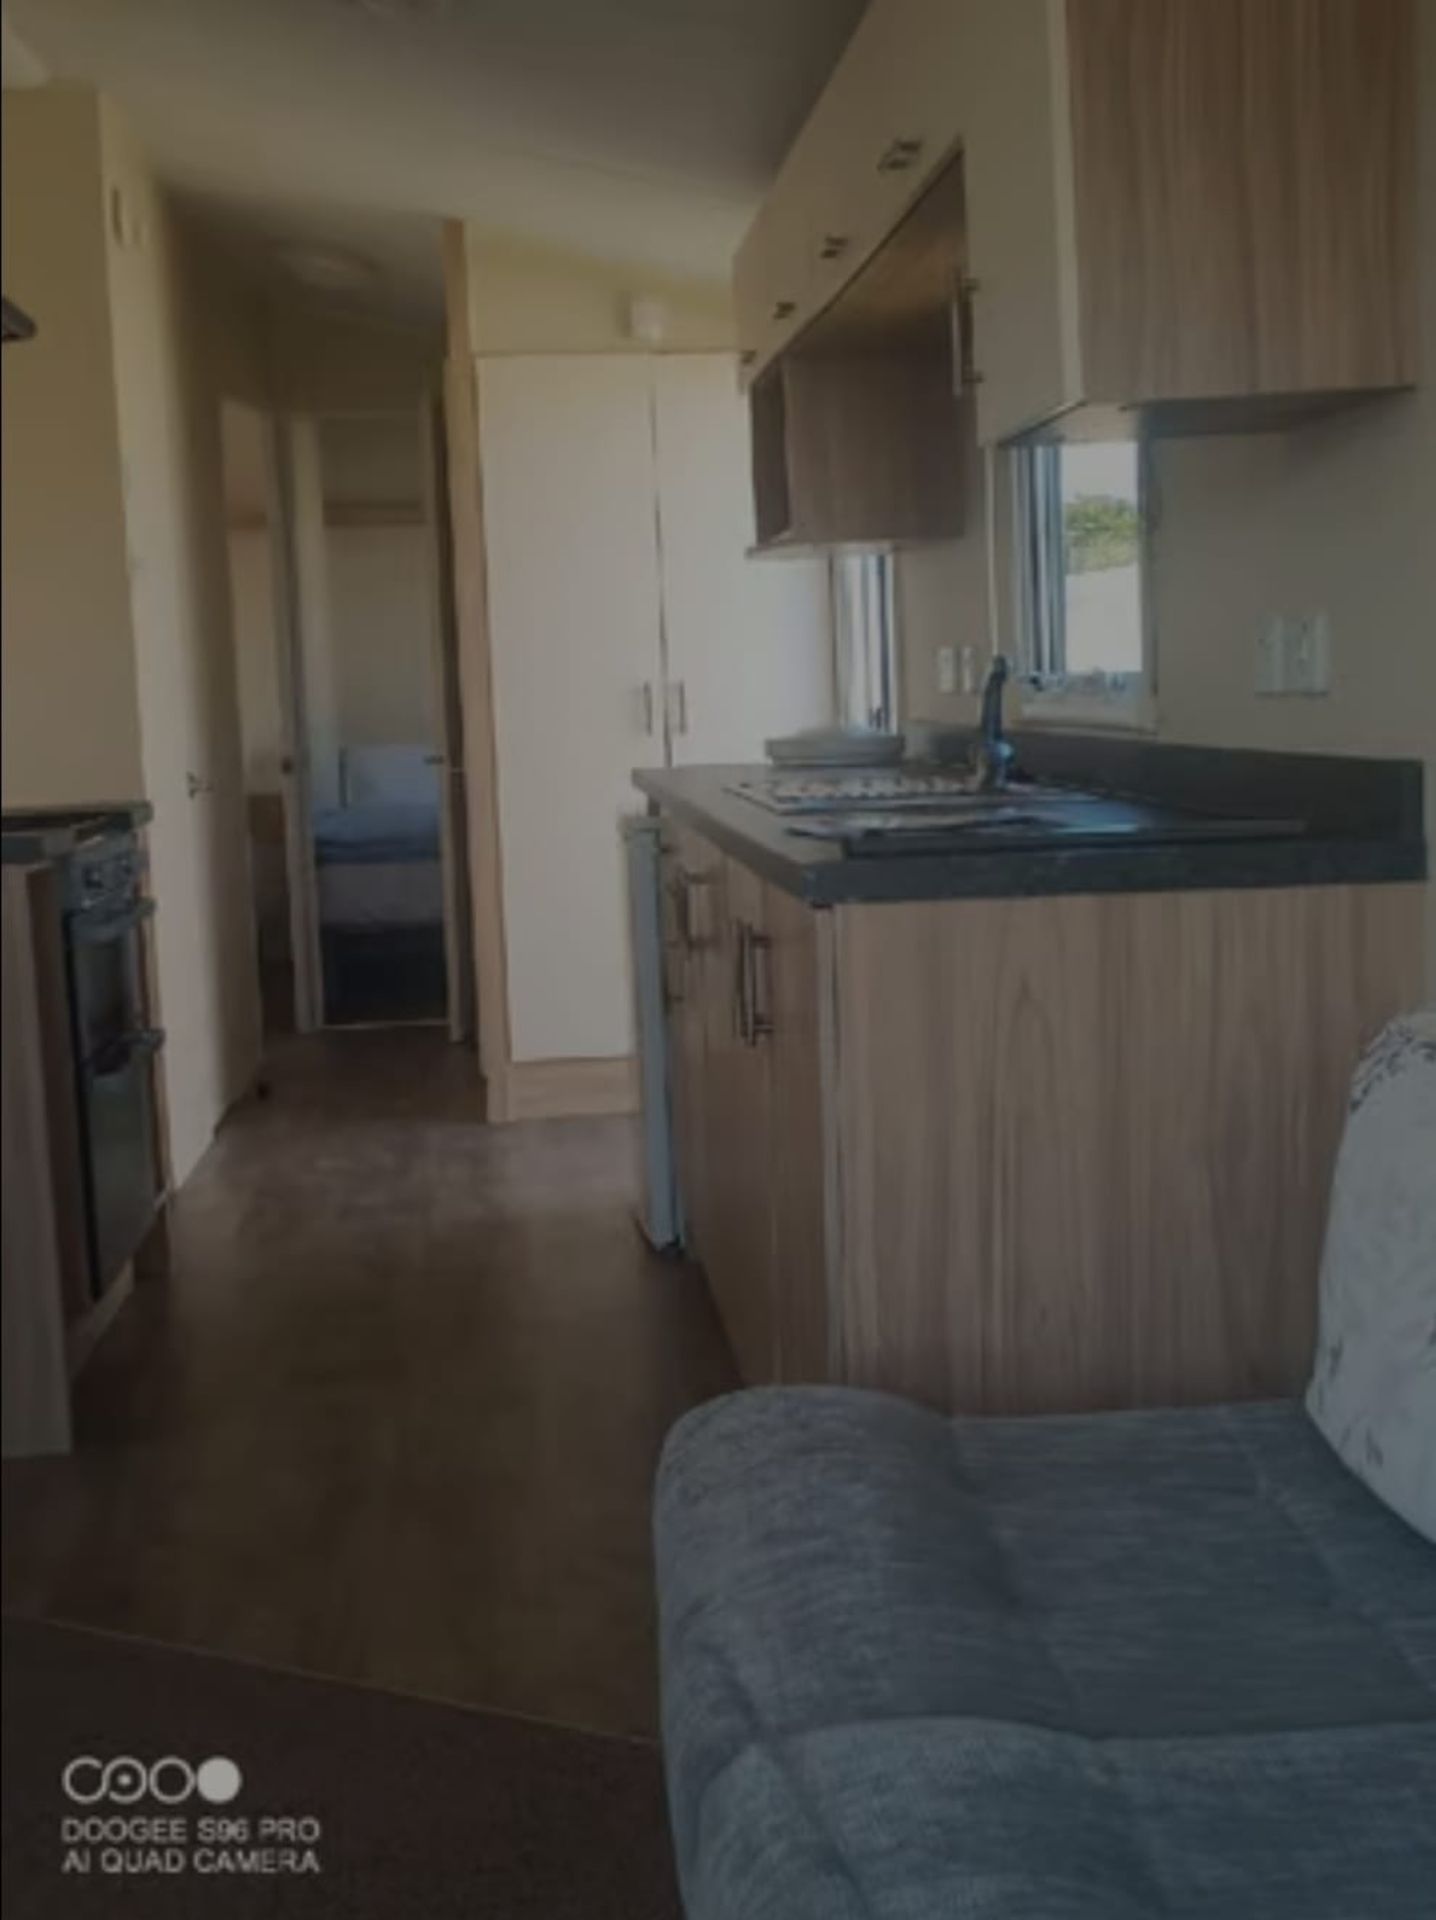 2015 WILLERBY ECO SALSA 3 BEDROOM holiday home ON-SITE SALE. - Image 13 of 13